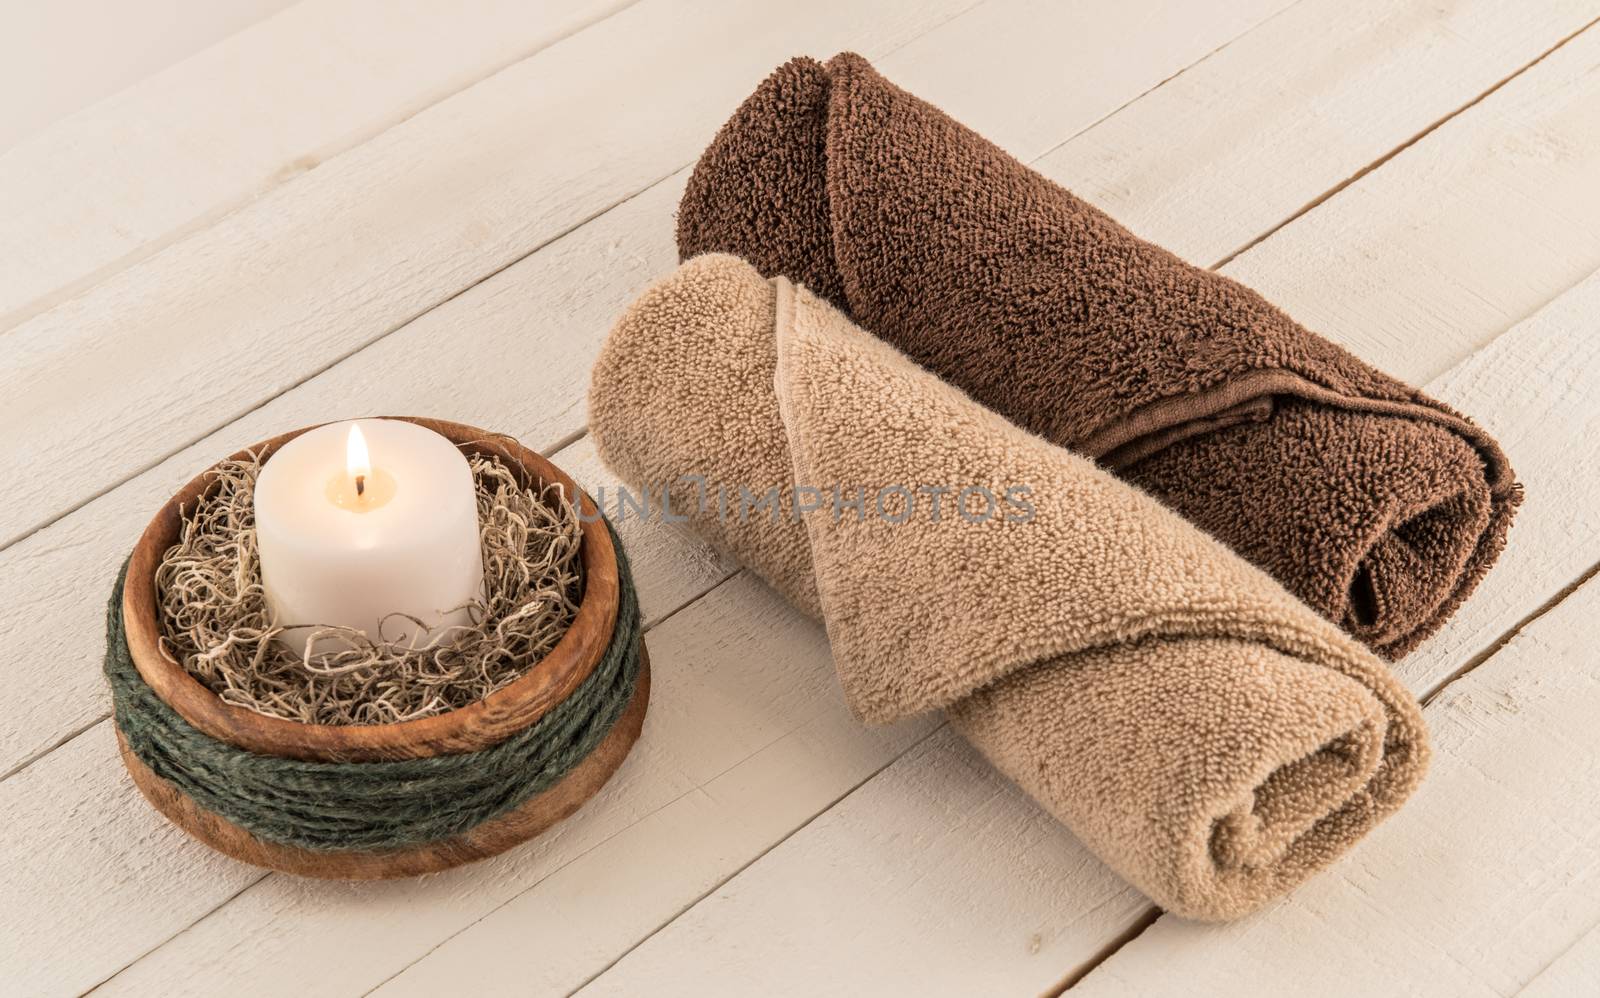 Spa Towels and Candle by krisblackphotography